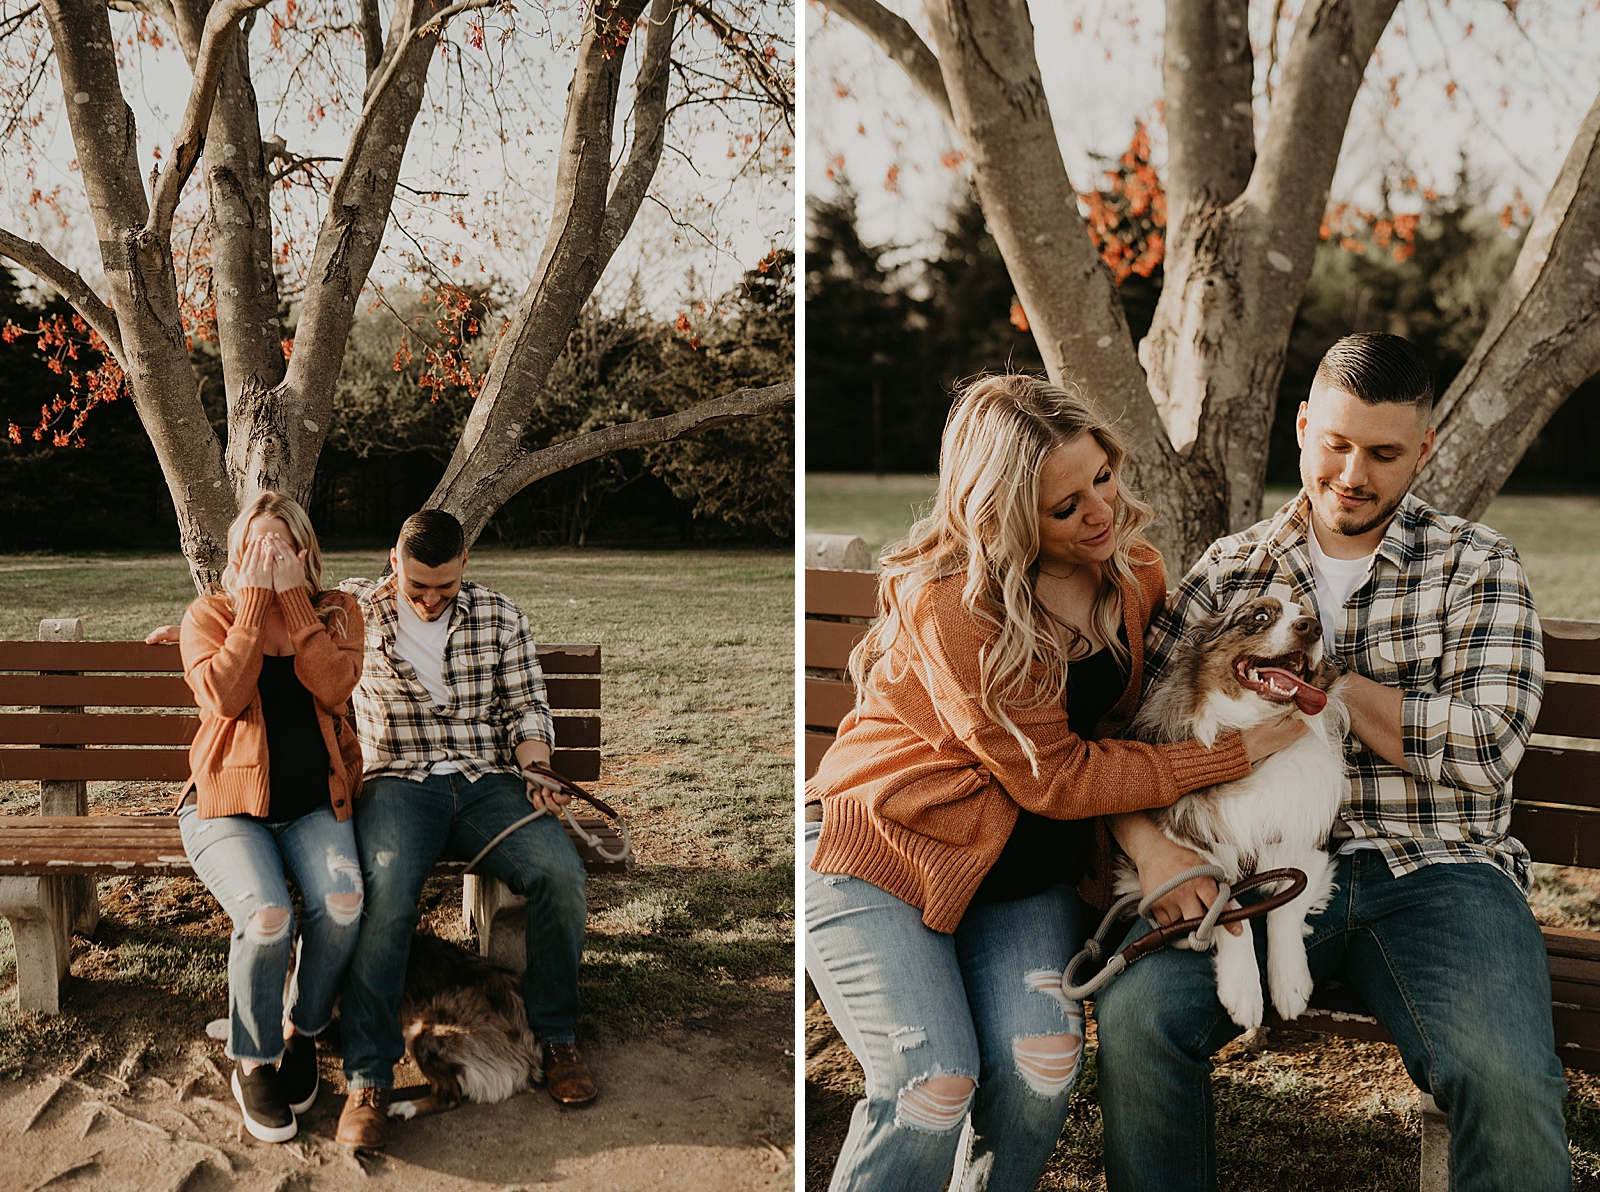 Candid shots of couple sitting on bench and interacting with dog